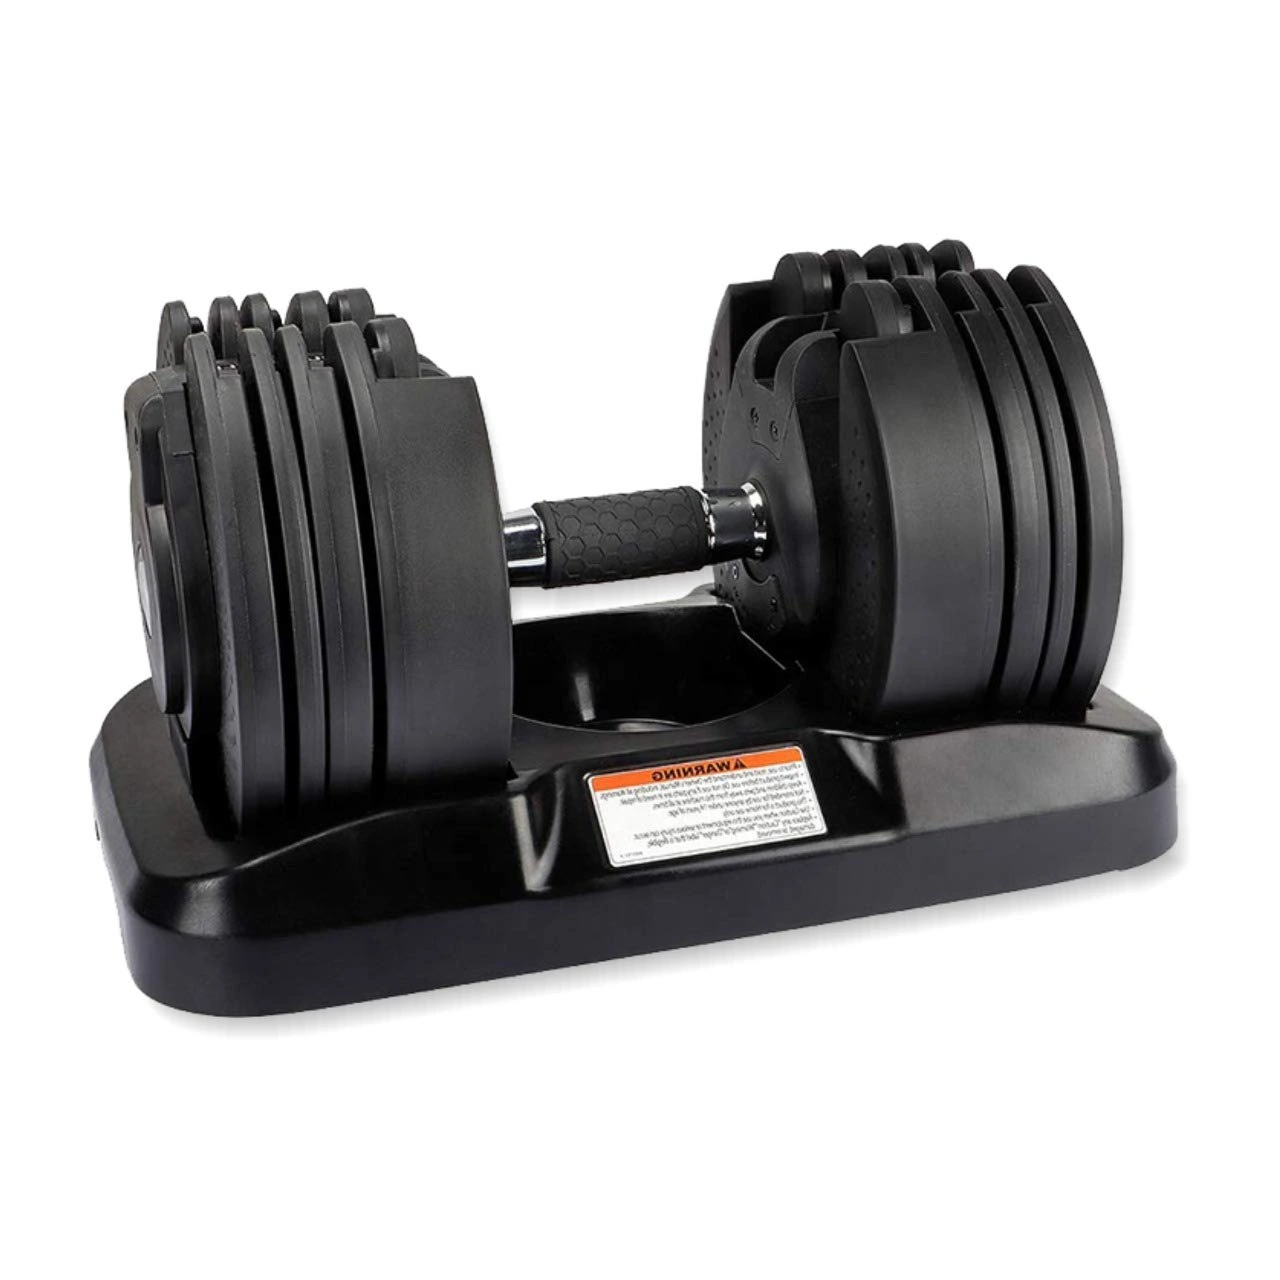 Reach Adjustable Dumbbell 2.5 Kg to 20 Kg All in One Dumbell Set with Twist Lock Technology Space Saver 1